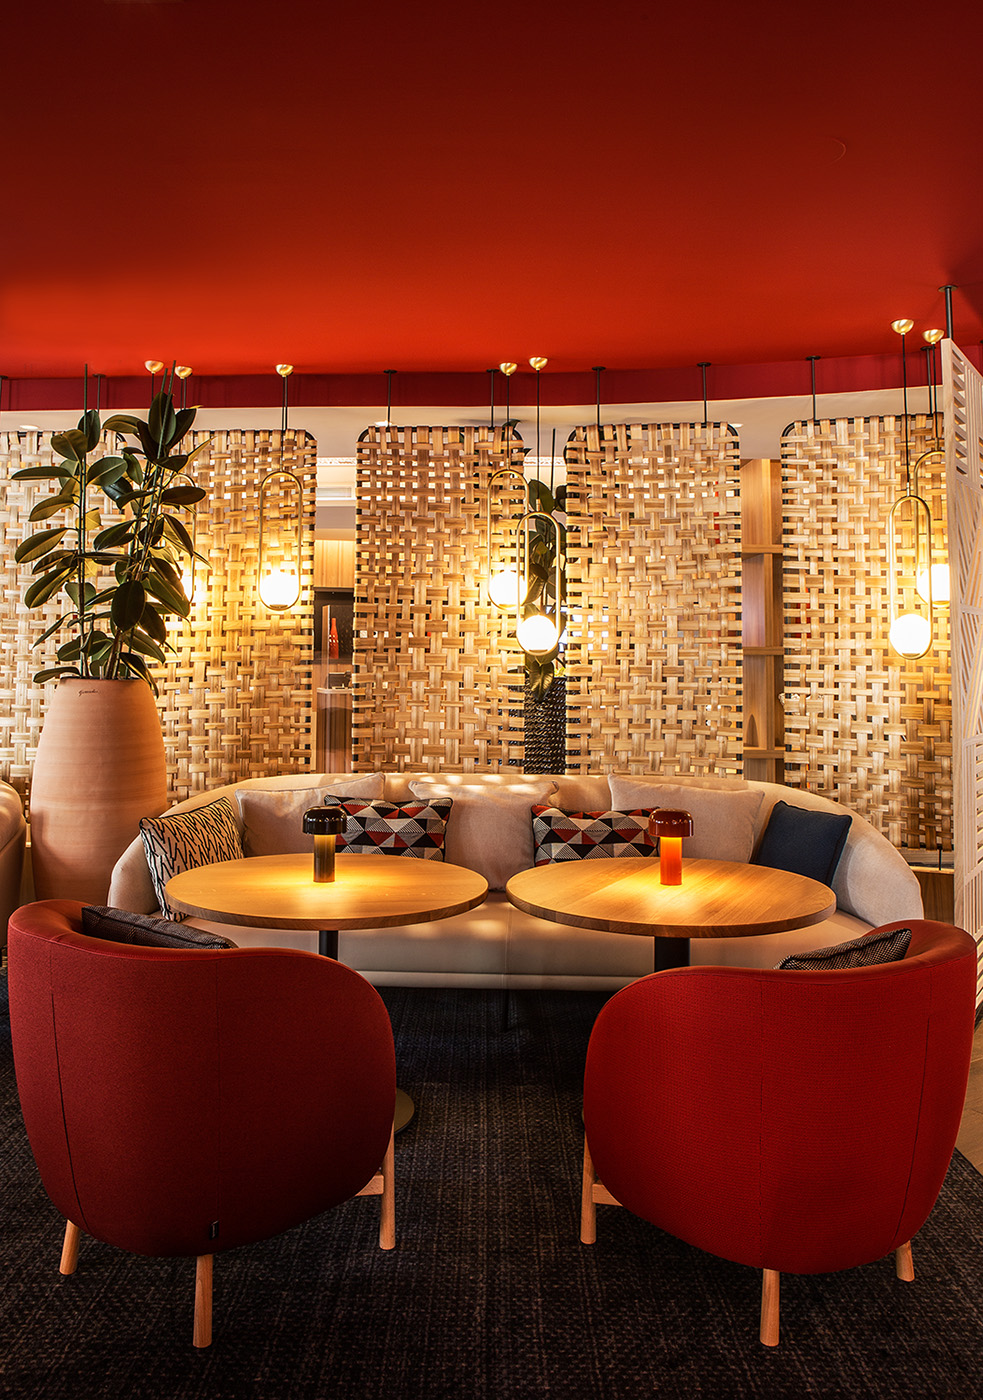 Tapas bar of the helianthal hotel and spa in Saint Jean de Luz, 4 star lifestyle hotel, seaside hotel designed by the interior design studio jean-philippe nuel, basque country decoration